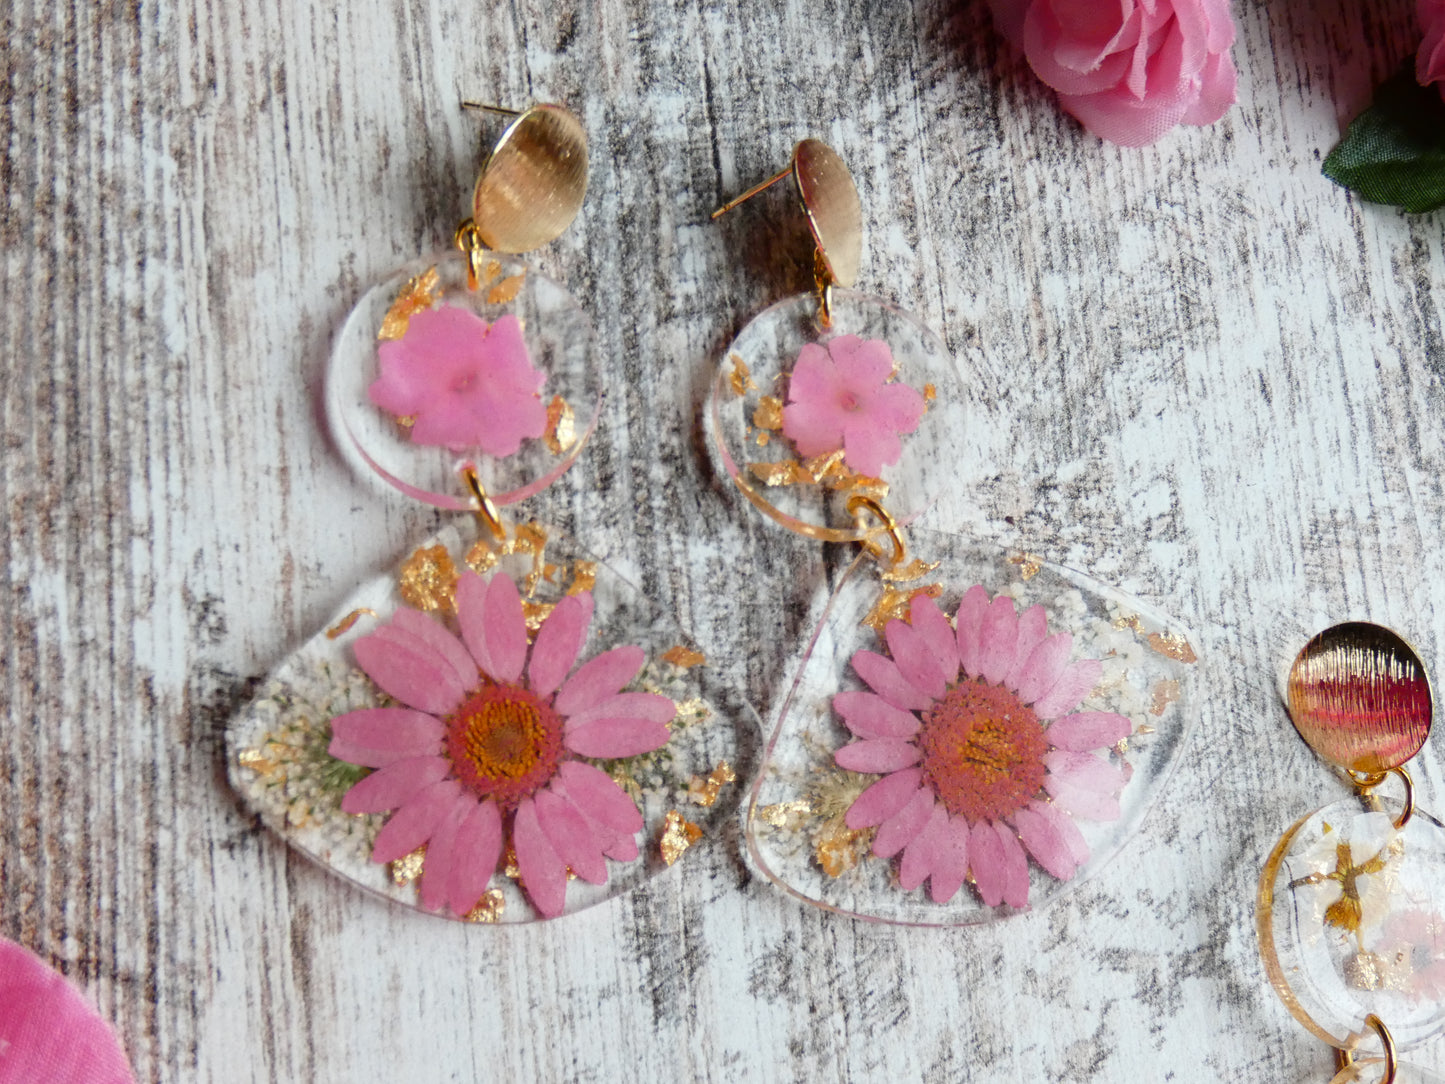 Long earrings filled with flowers